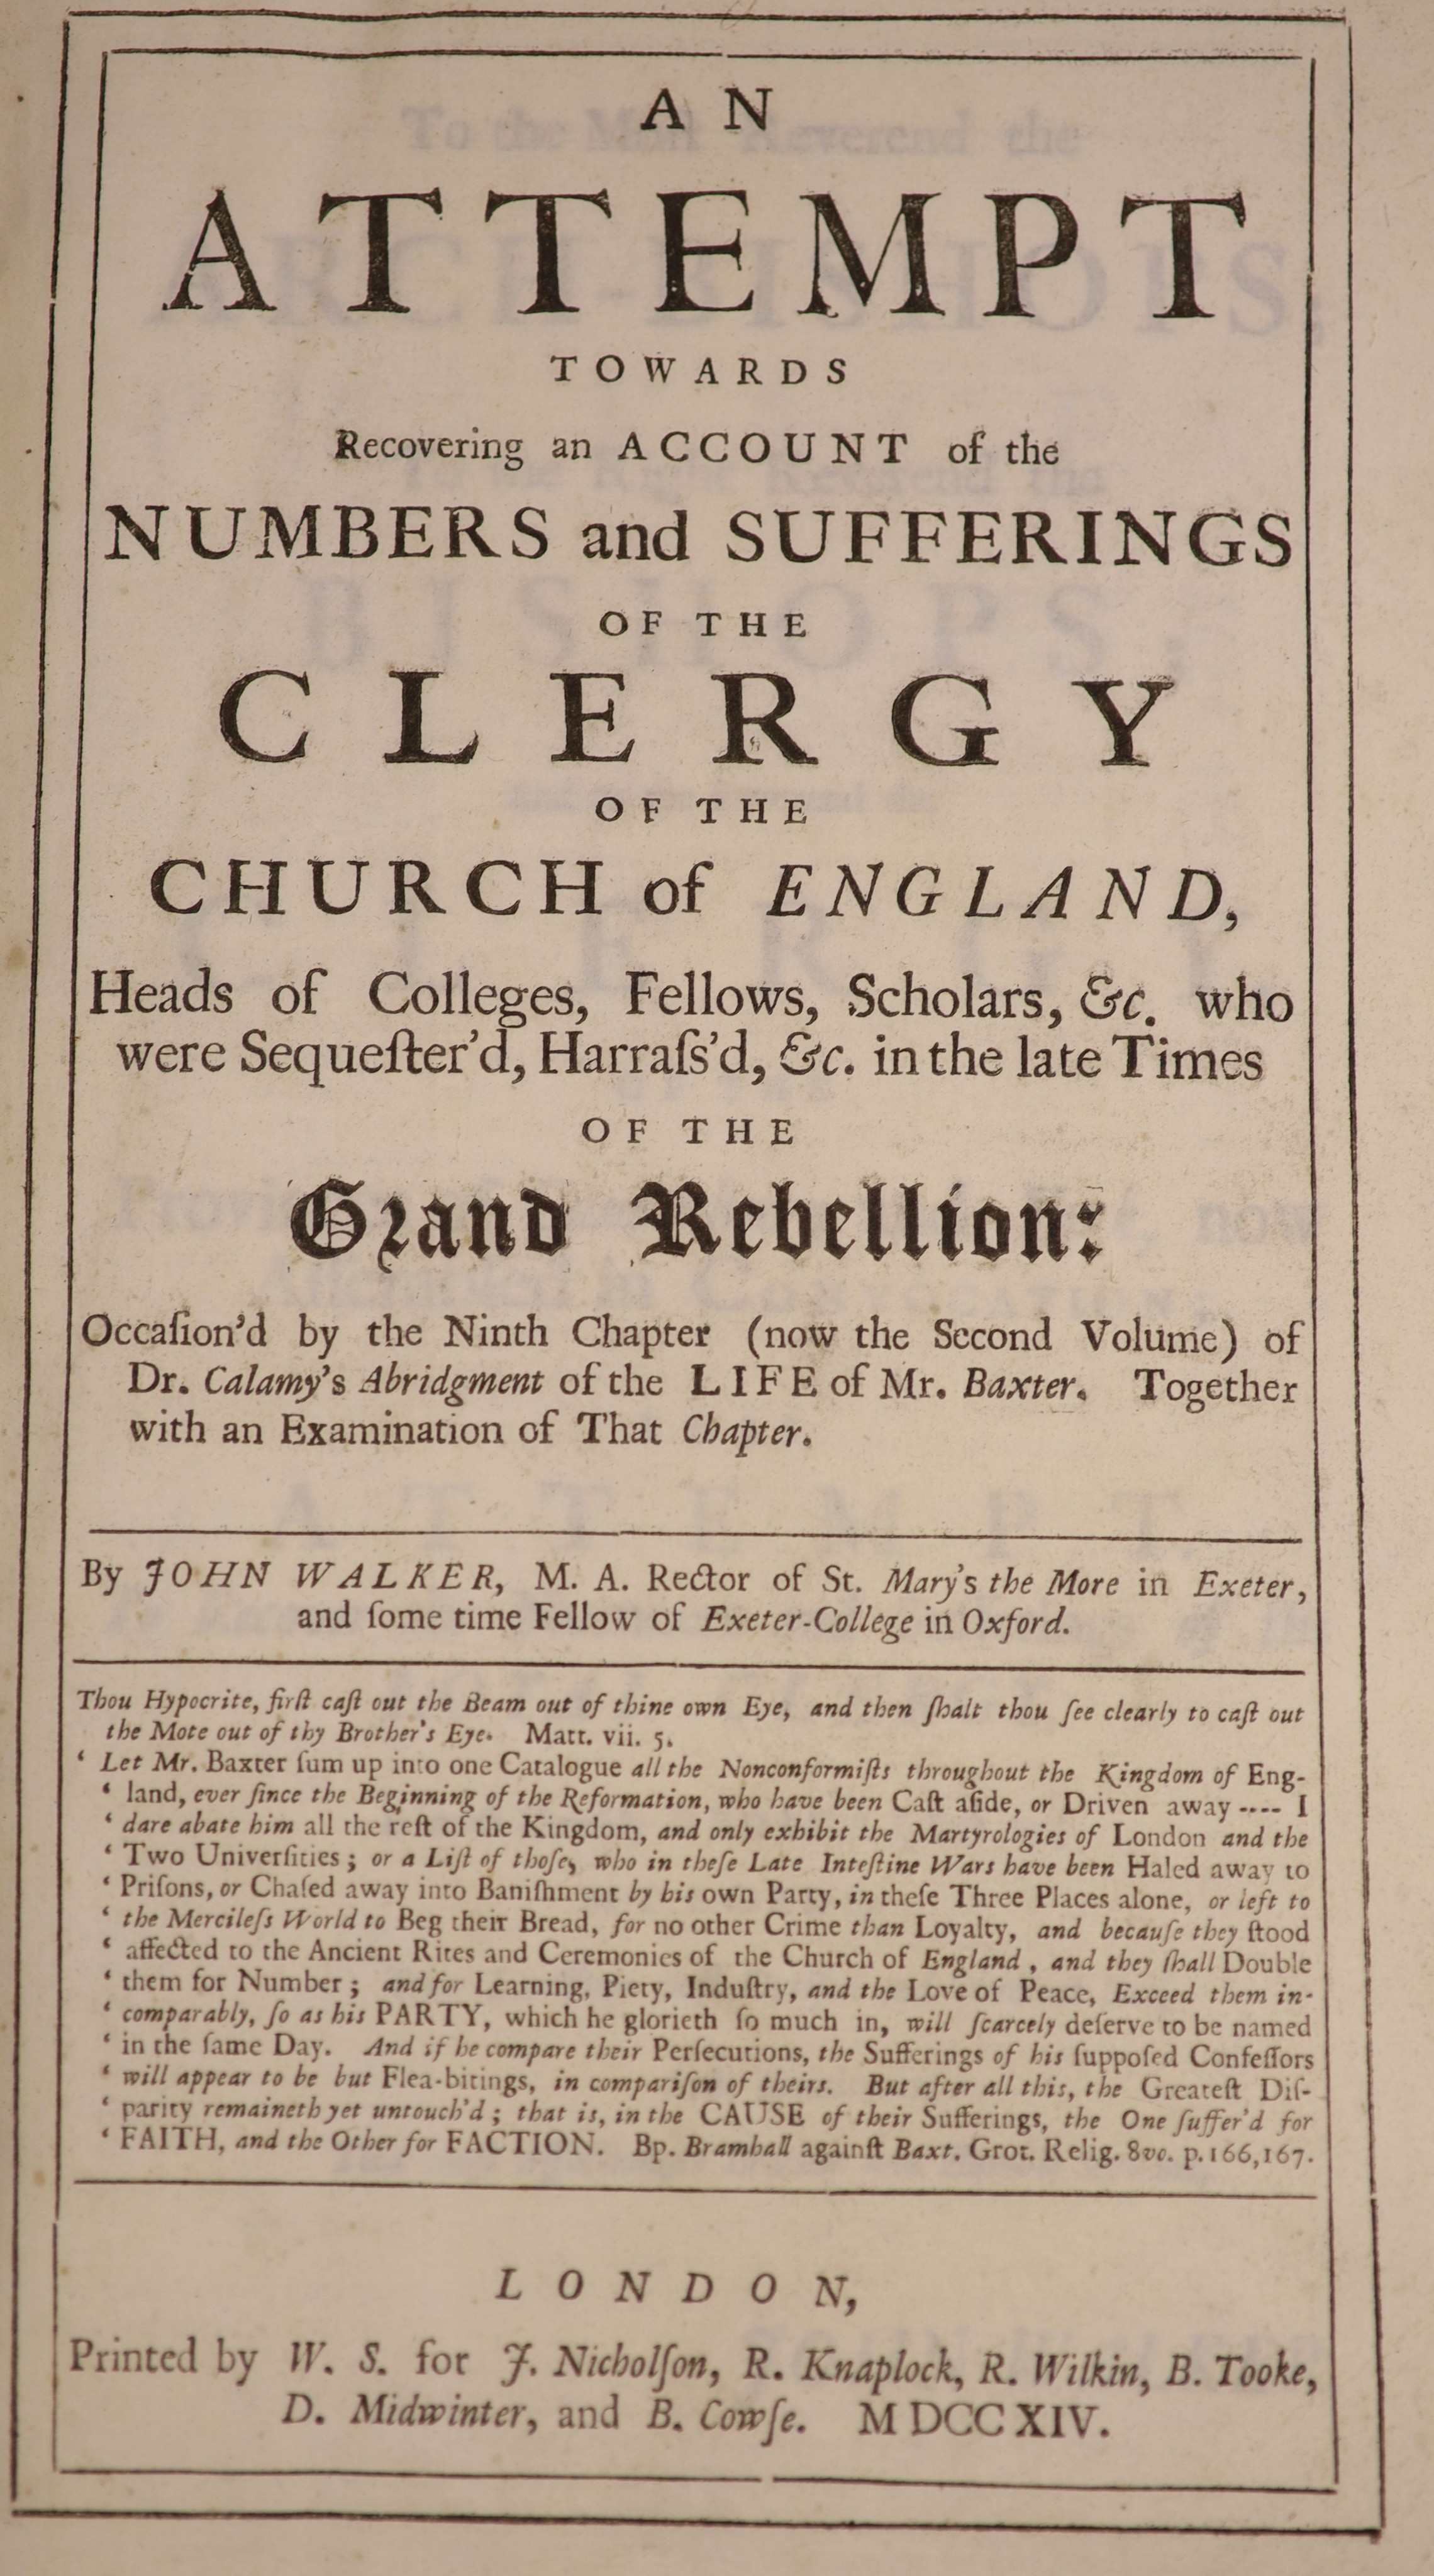 Walker, John. An Attempt towards Recovering an Account of the Numbers and Sufferings of the Clergy of the Church of England... in the late times of the Grand Rebellion...